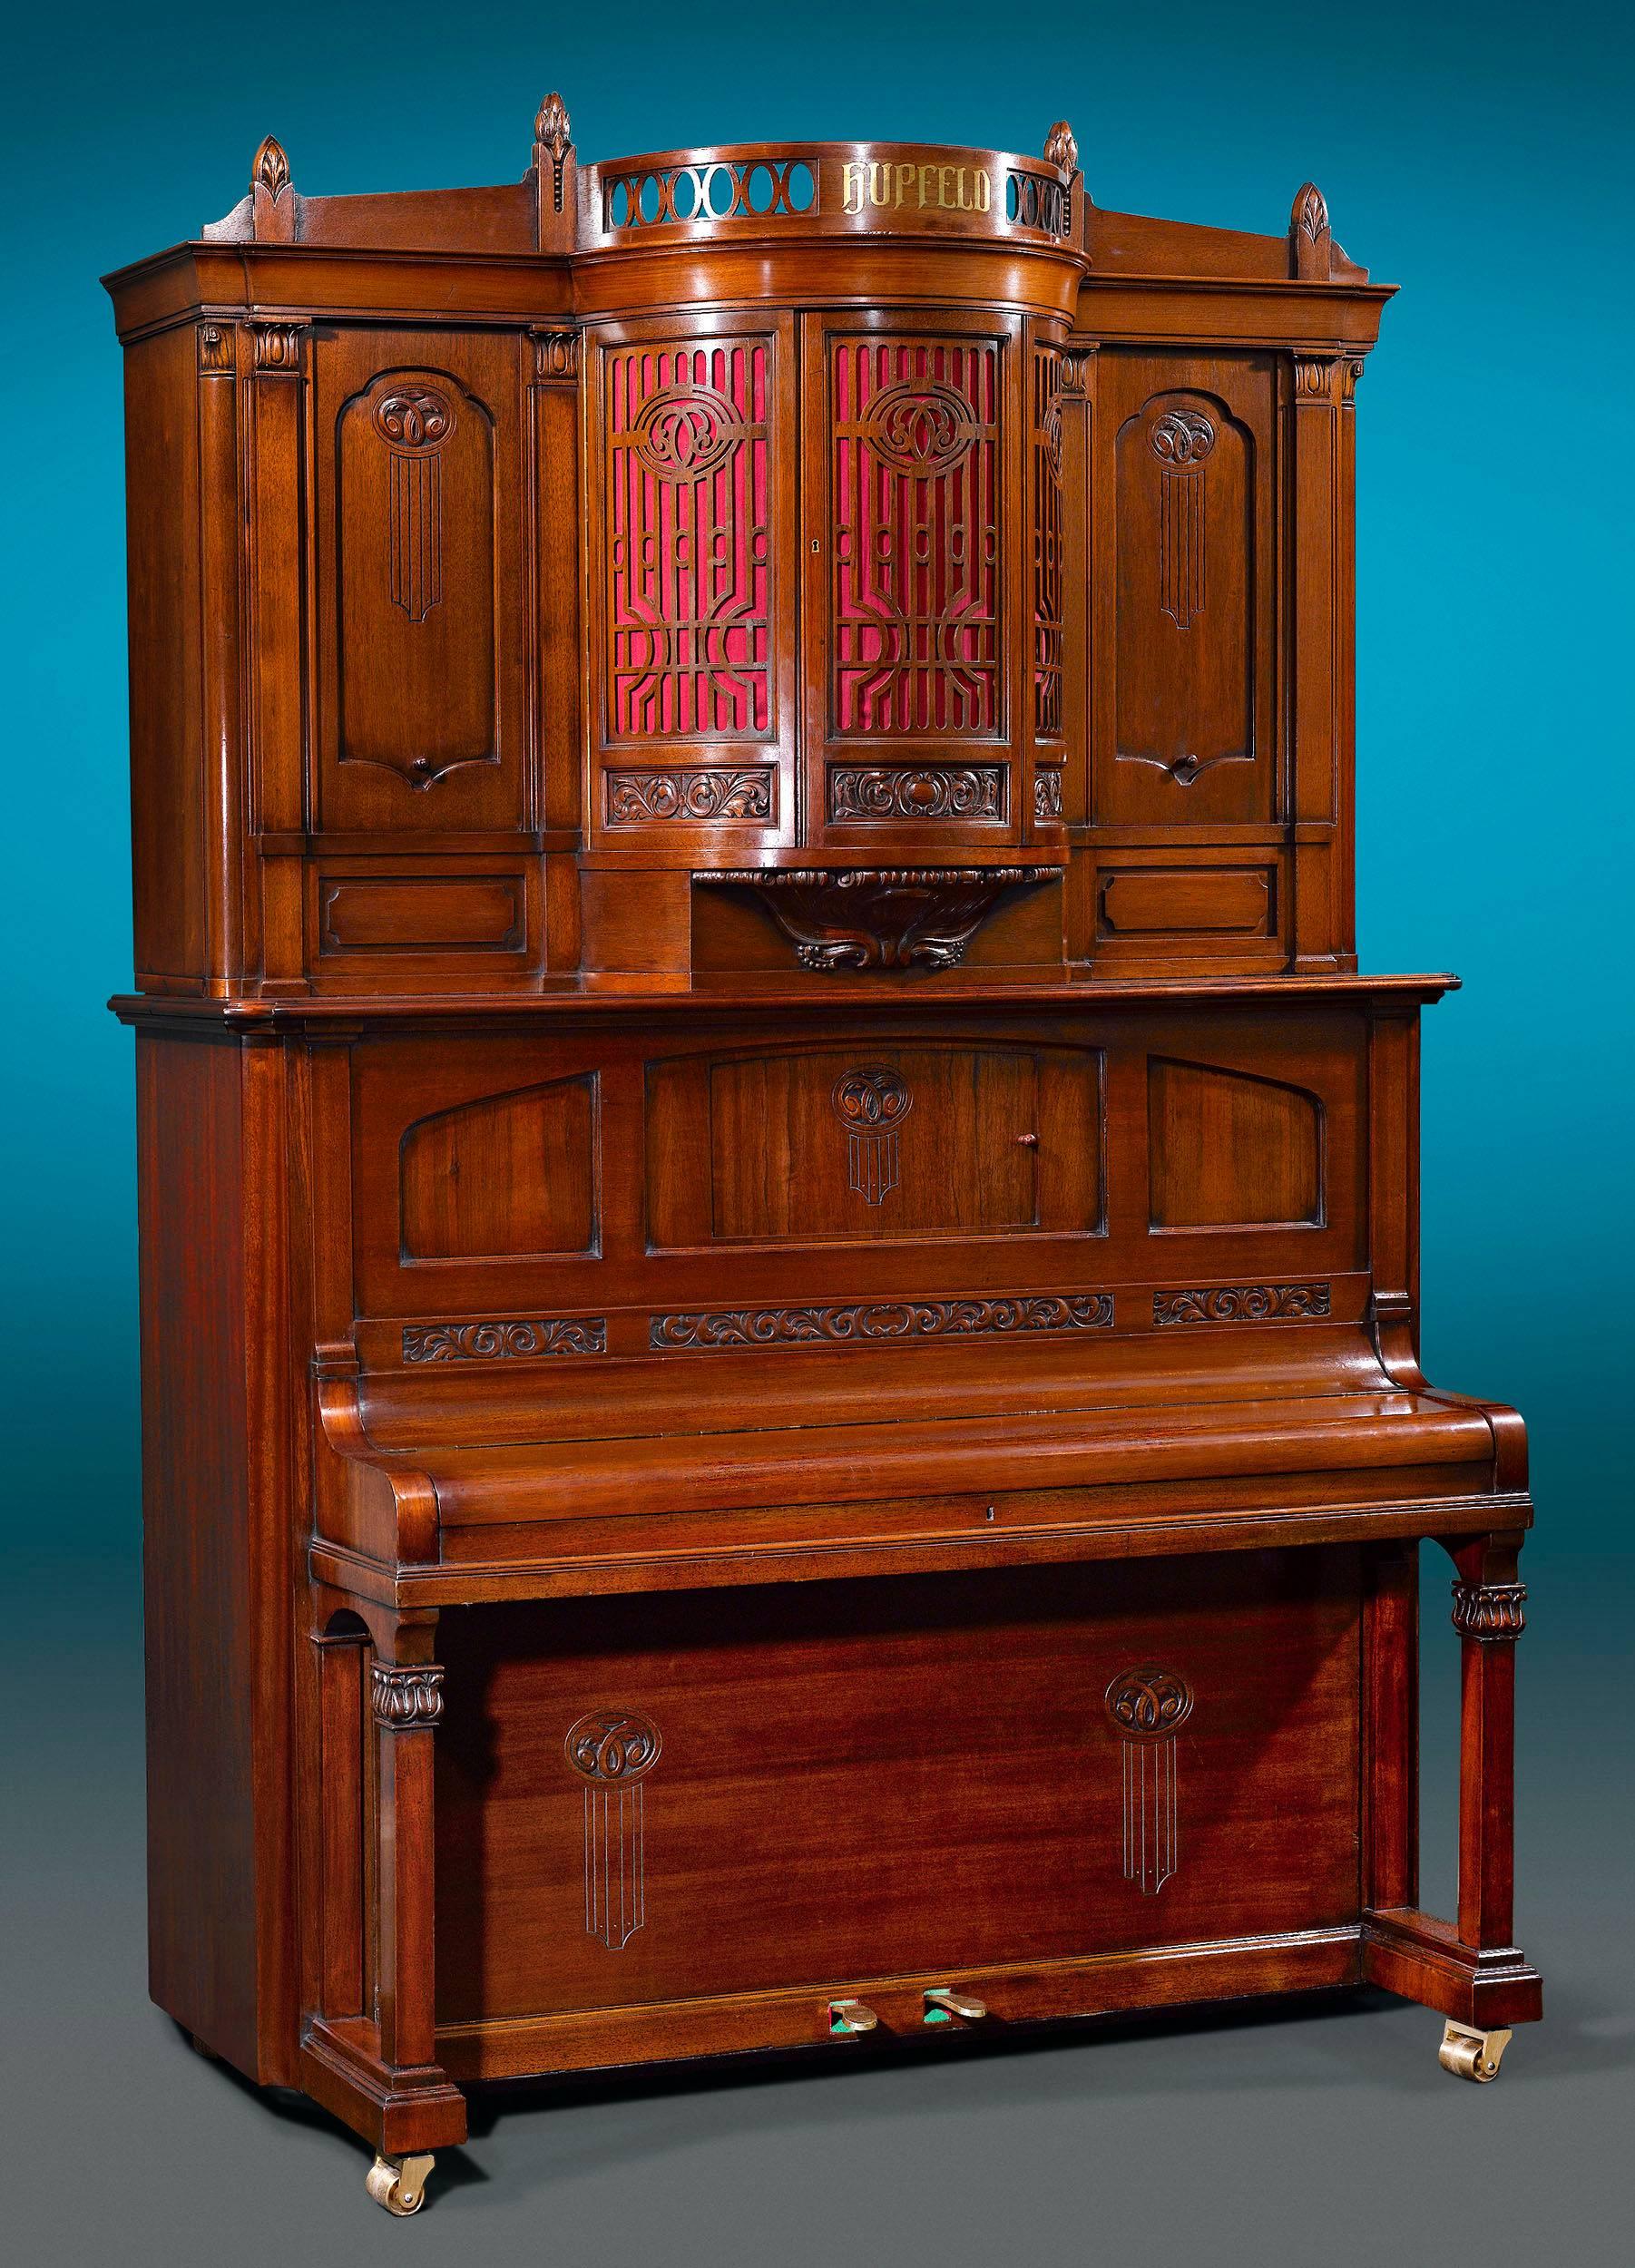 Hupfeld Phonoliszt-Violina Model B Music Cabinet In Excellent Condition For Sale In New Orleans, LA